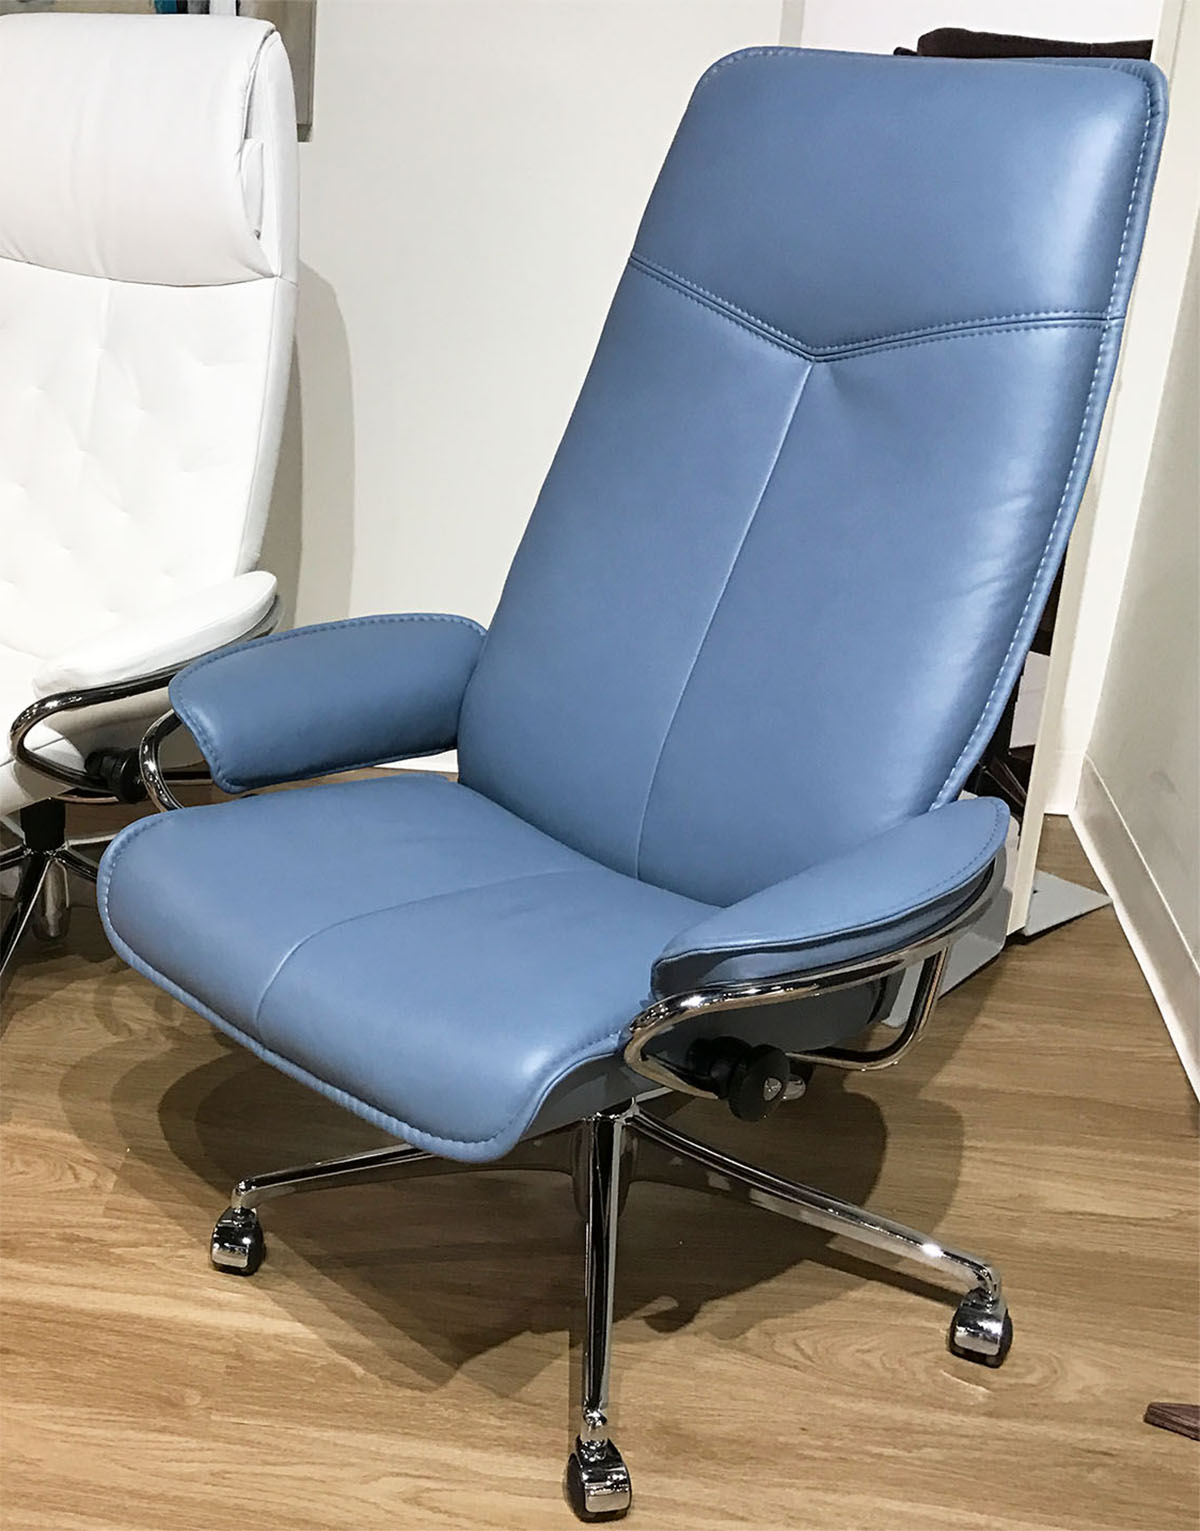 Stressless City High Back Office Desk Chair in Paloma Sparrow Blue